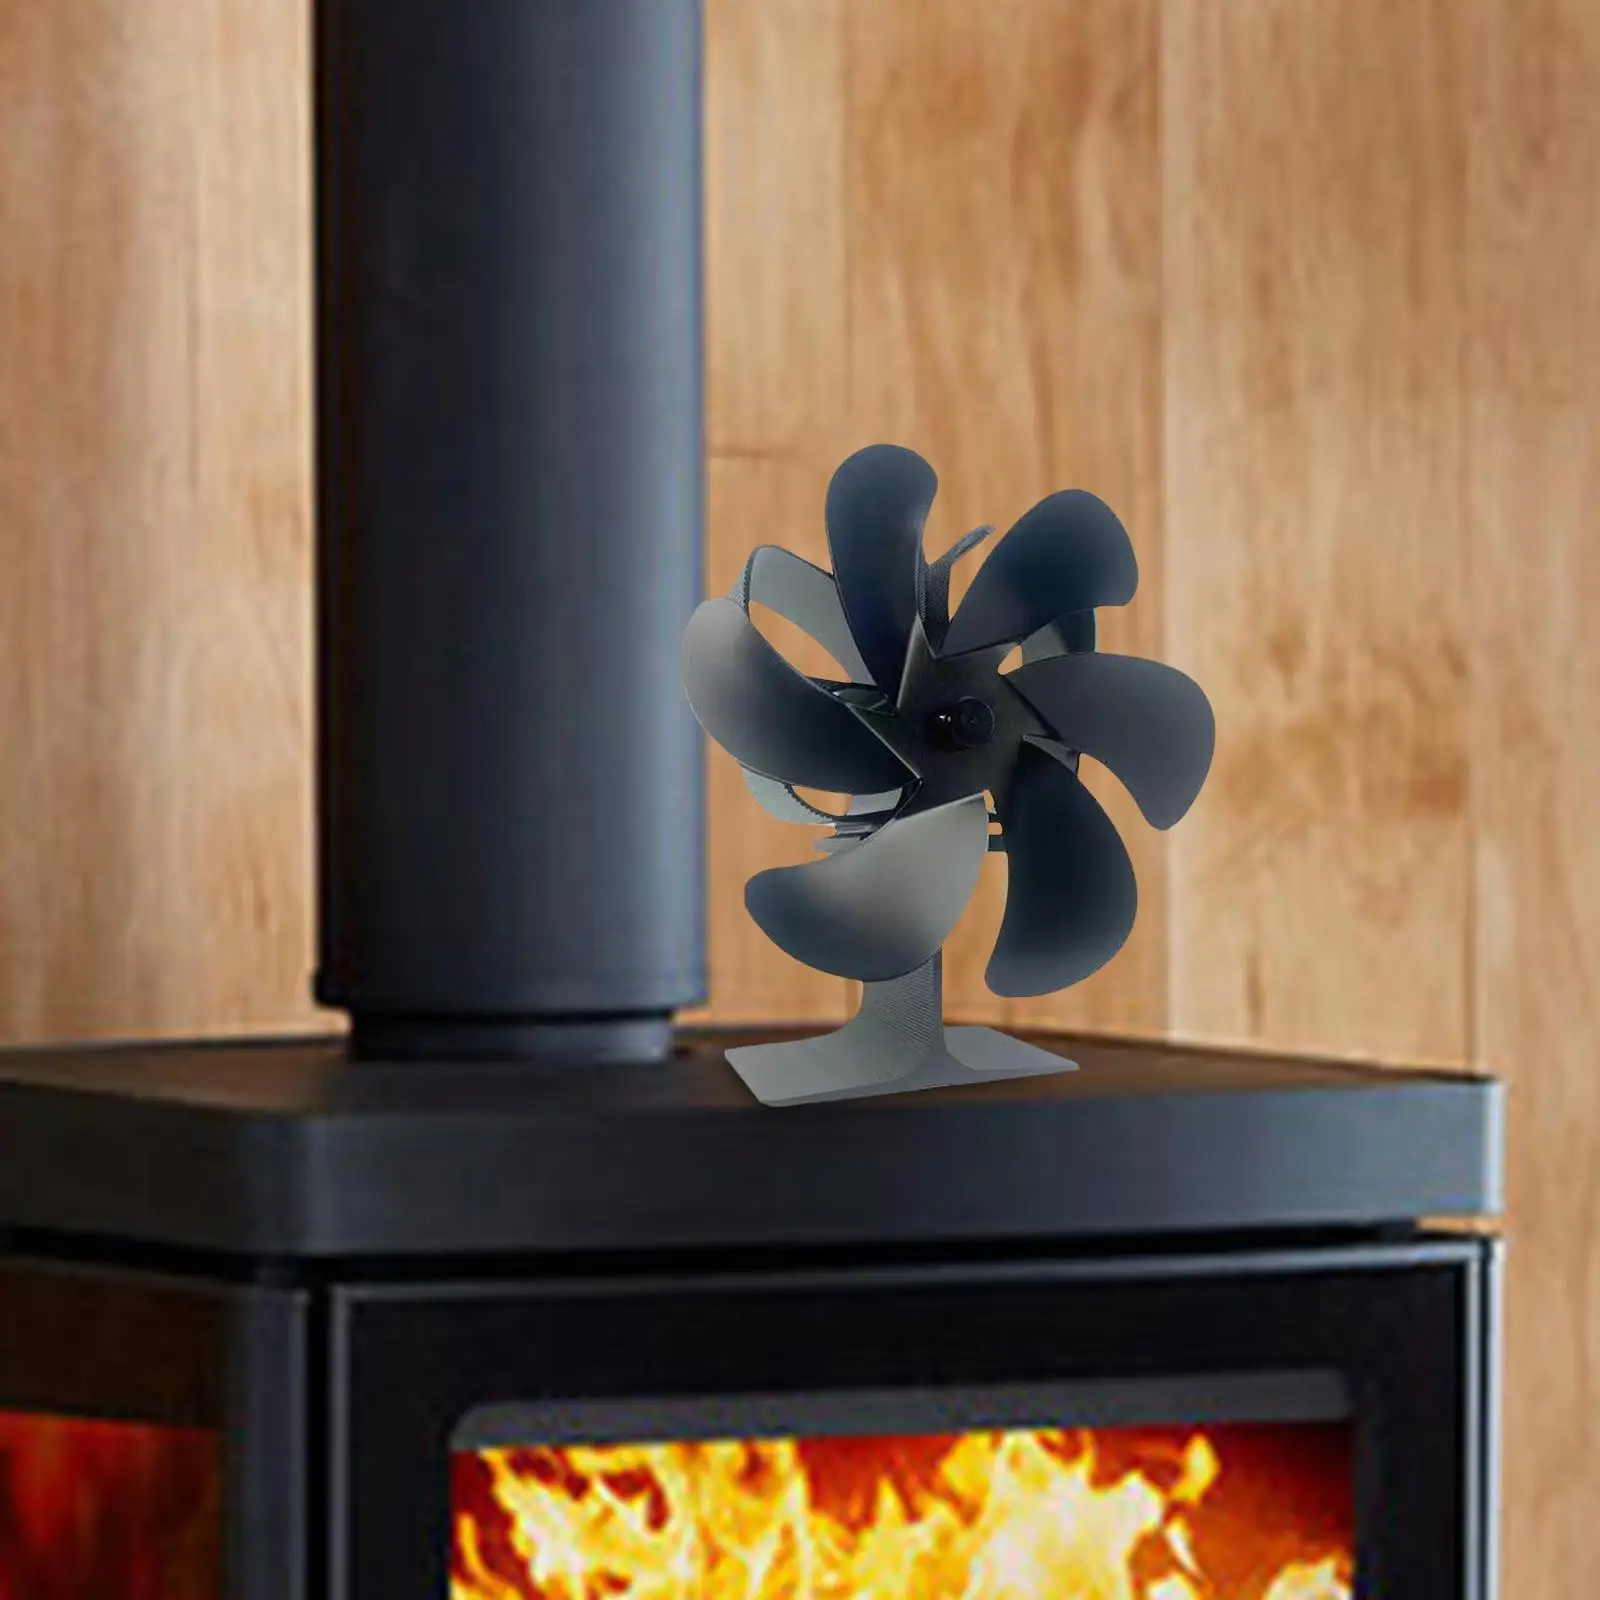 Wood Burner Fireplace Stove Fan 6 Blade Efficient Low Noise Working Temperature 80-350°C/176-662°F Professional Black Color